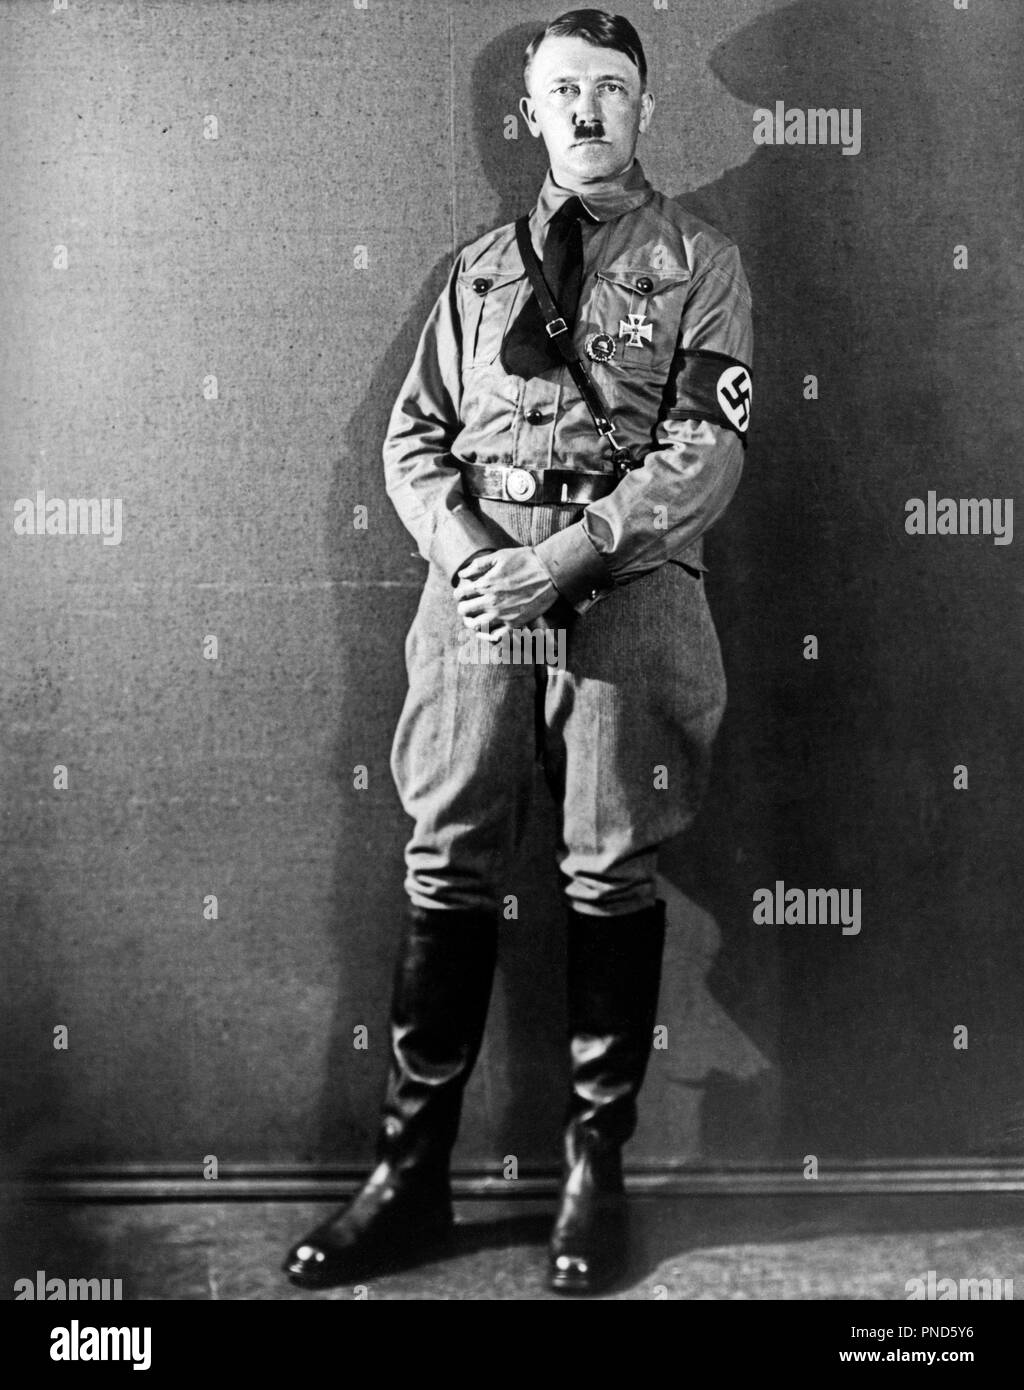 1920s 1930s FULL FIGURE STANDING ADOLF HITLER DER FUHRER WEARING BROWN SHIRT UNIFORM WITH SWASTIKA ARM BAND LOOKING AT CAMERA - q72075 CPC001 HARS PERSONALITY FAMOUS LEADERSHIP MONSTER WORLD WAR II DICTATOR SWASTIKA POLITICS ADOLF DER INFAMOUS MURDERER NAZI FASCIST ADOLF HITLER CONFLICTING DER FUHRER FUHRER GENOCIDE MID-ADULT MID-ADULT MAN MURDER PERSONALITIES SUICIDE BATTLING BLACK AND WHITE CAUCASIAN ETHNICITY FAMOUS PERSON OLD FASHIONED Stock Photo